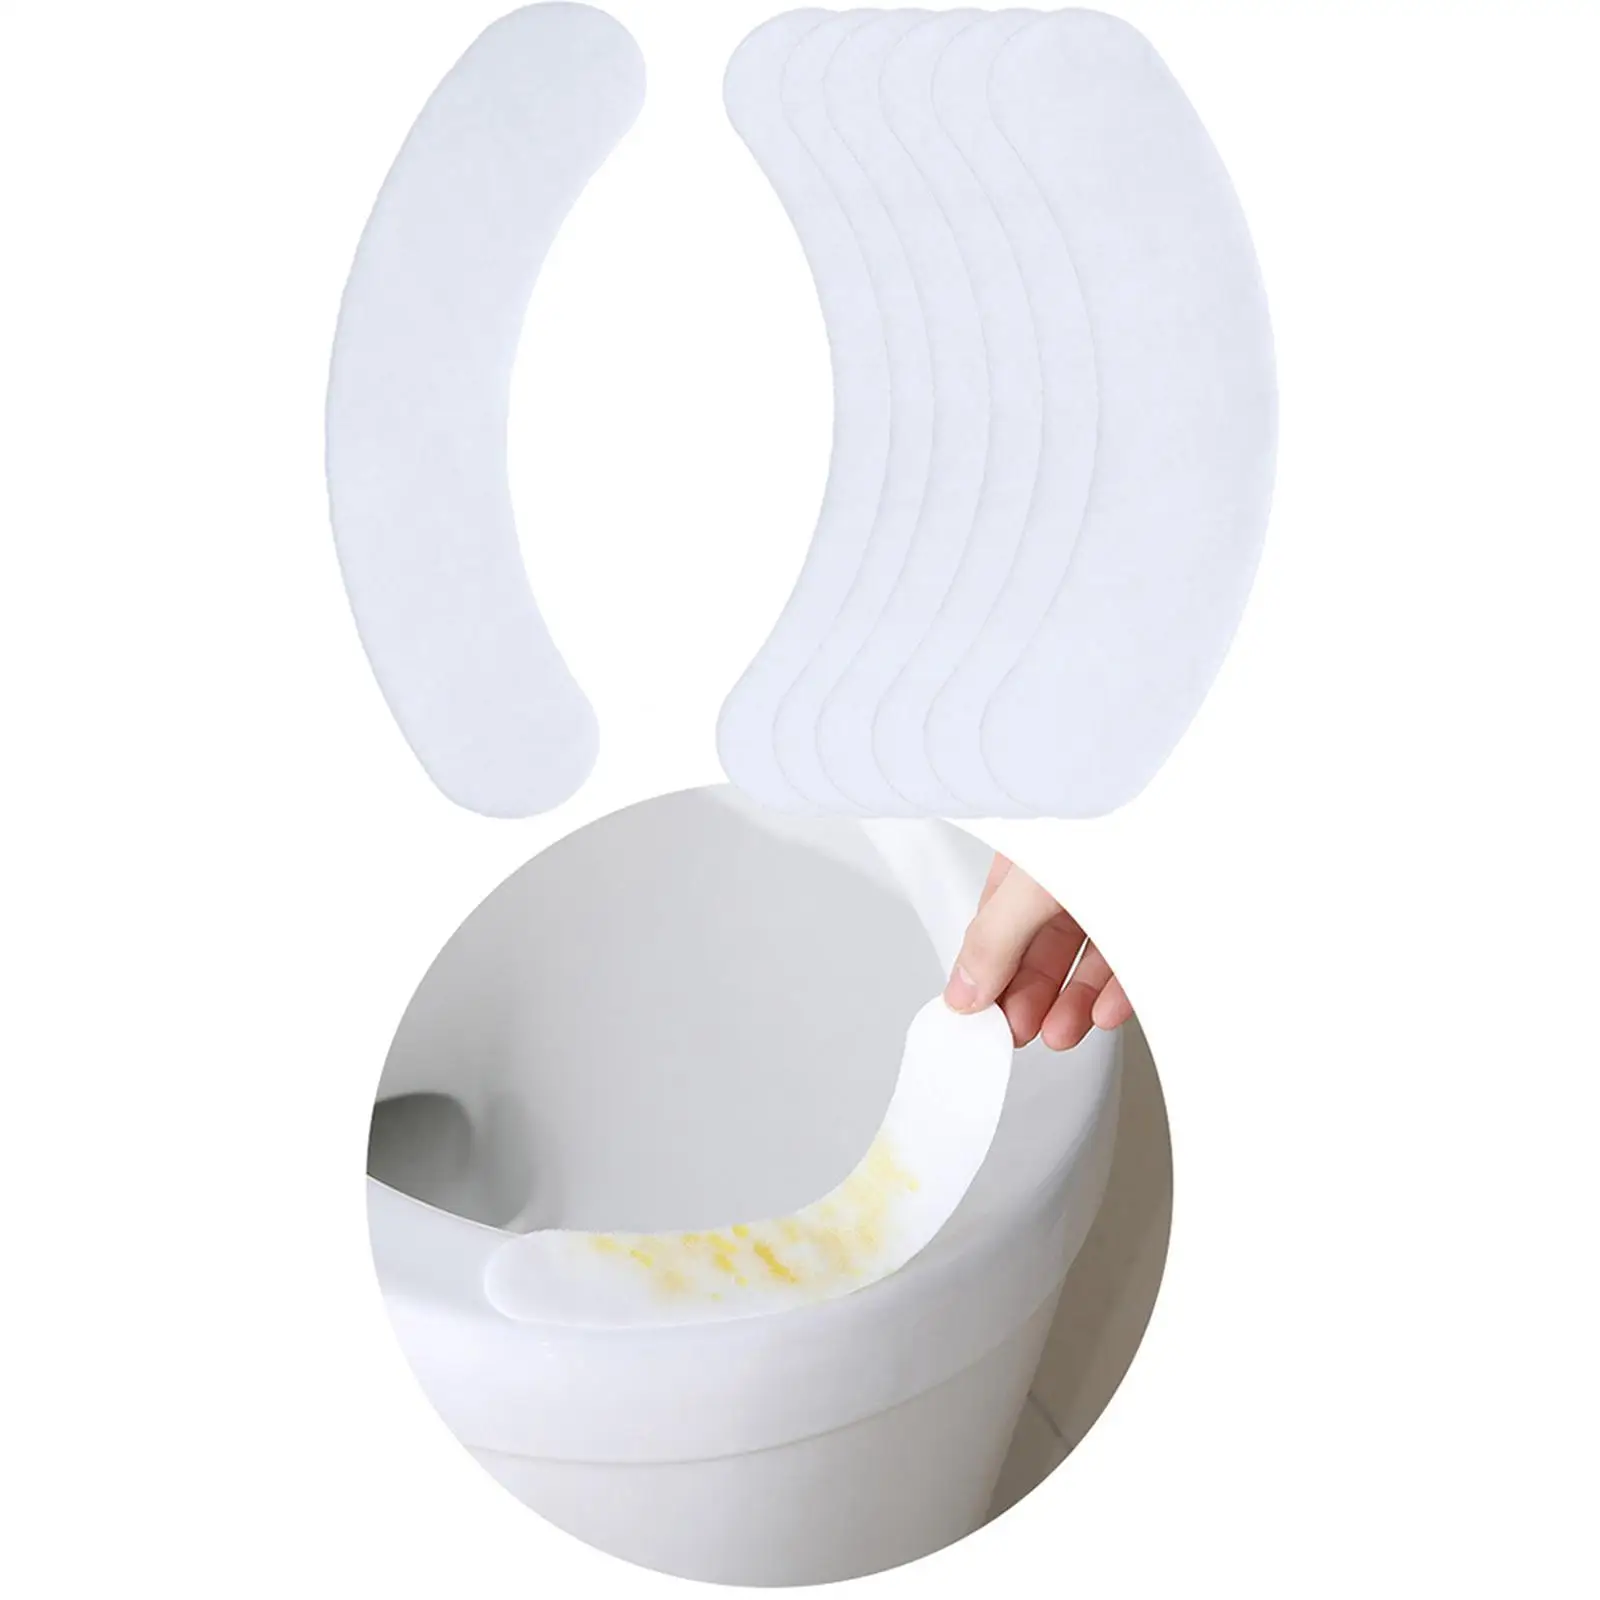 Toilet Pad Reusable A Pad for Children to Suck Urine Potty Pad Mute Pad Pad for Camping Home Use Toddler